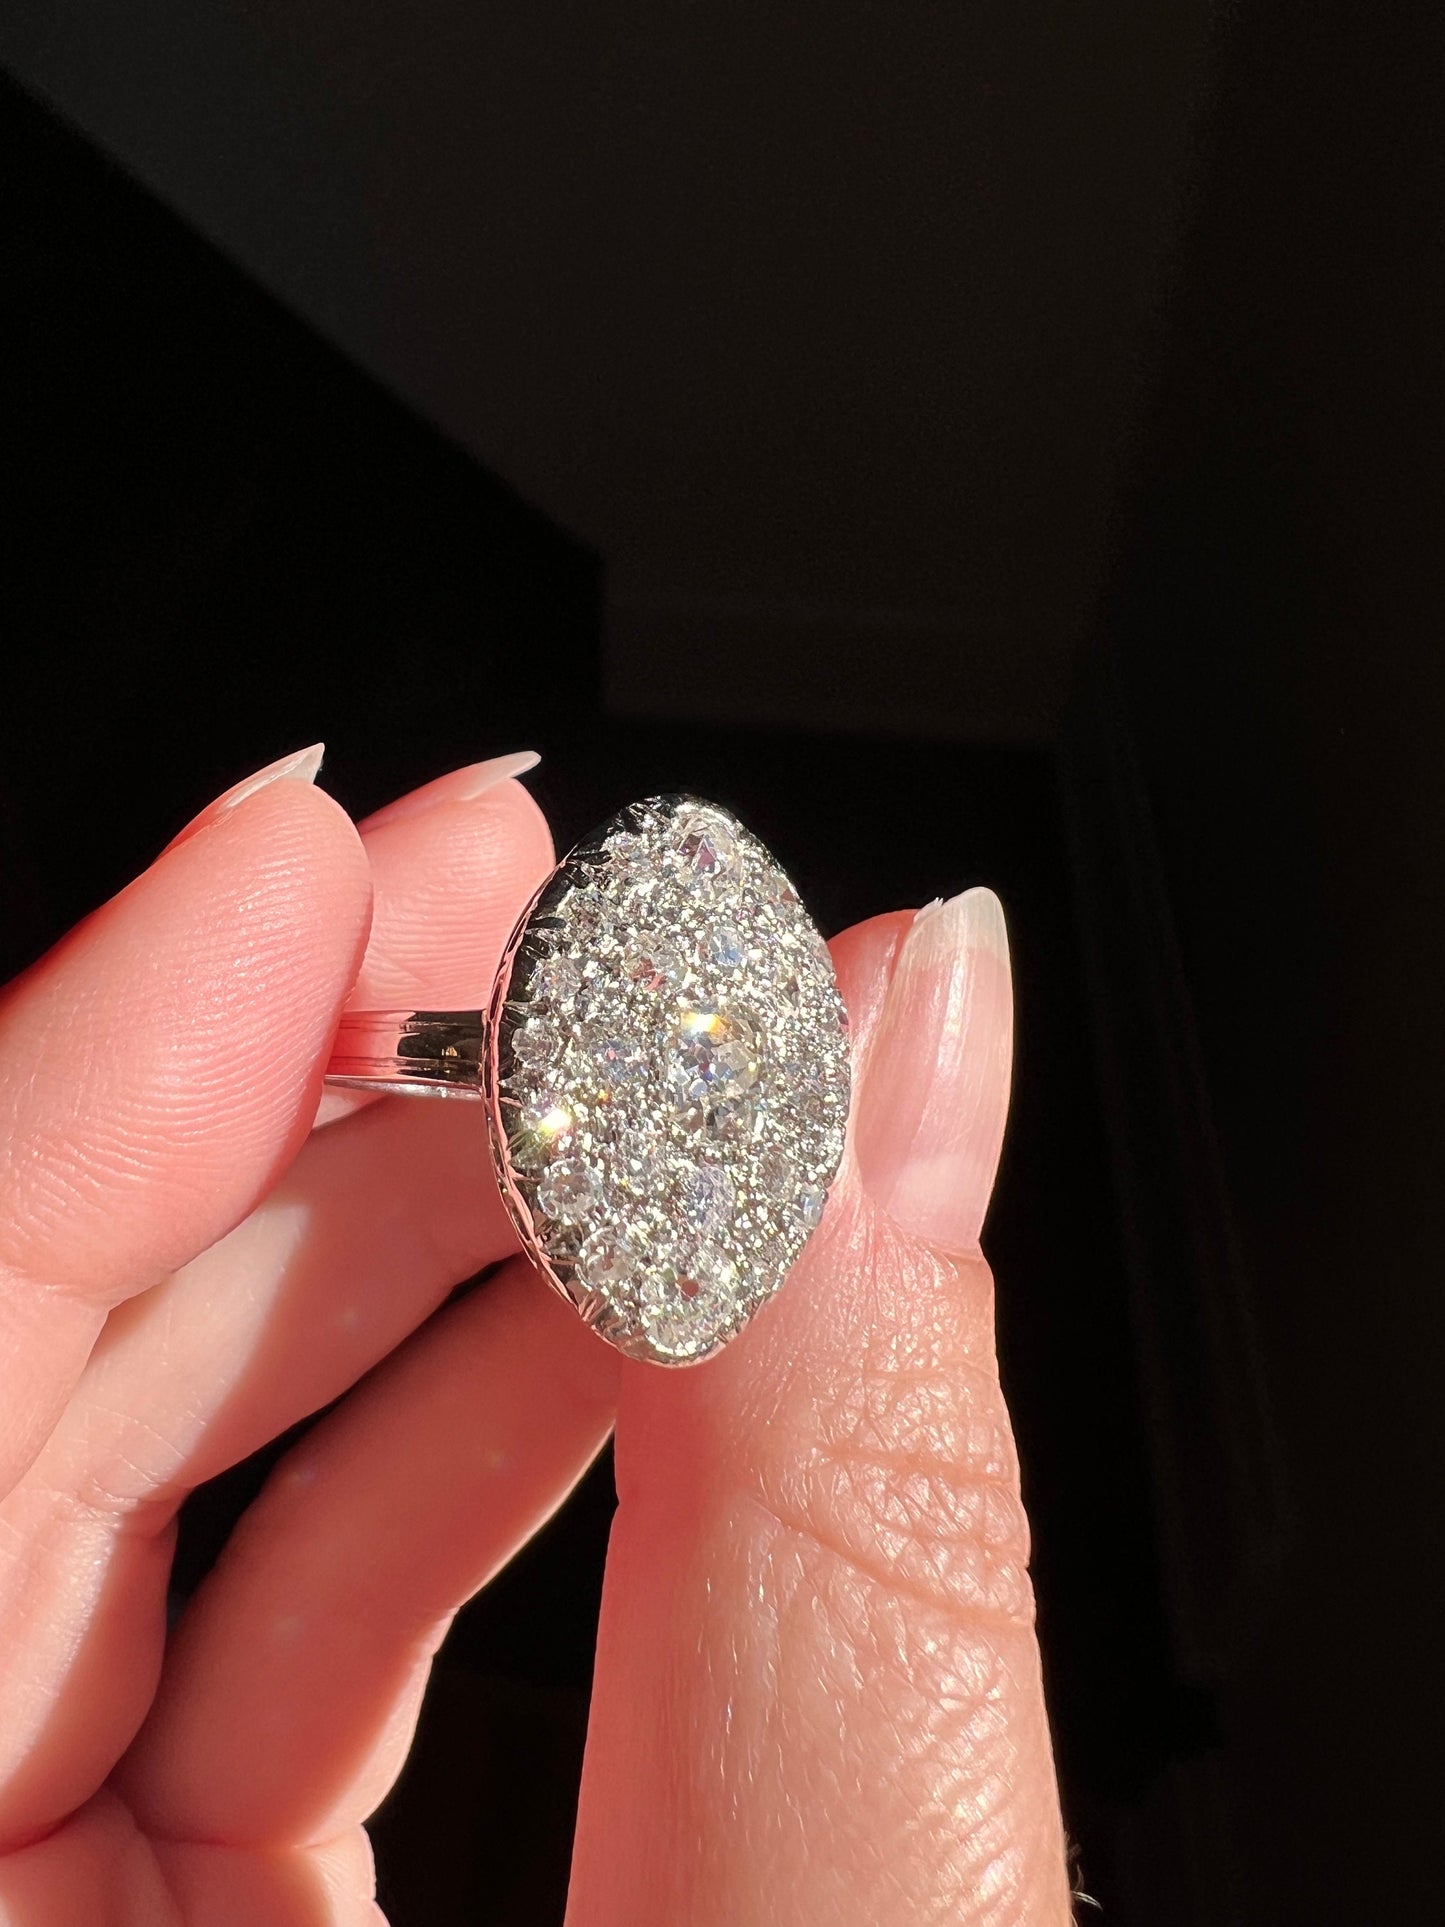 XL Domed Oval 1.75 Carat Old Mine Cut Diamond Cluster RING 18k White Gold PLATINUM French ANTiQUE Belle Epoque Gift OmC Cobblestone Art Deco